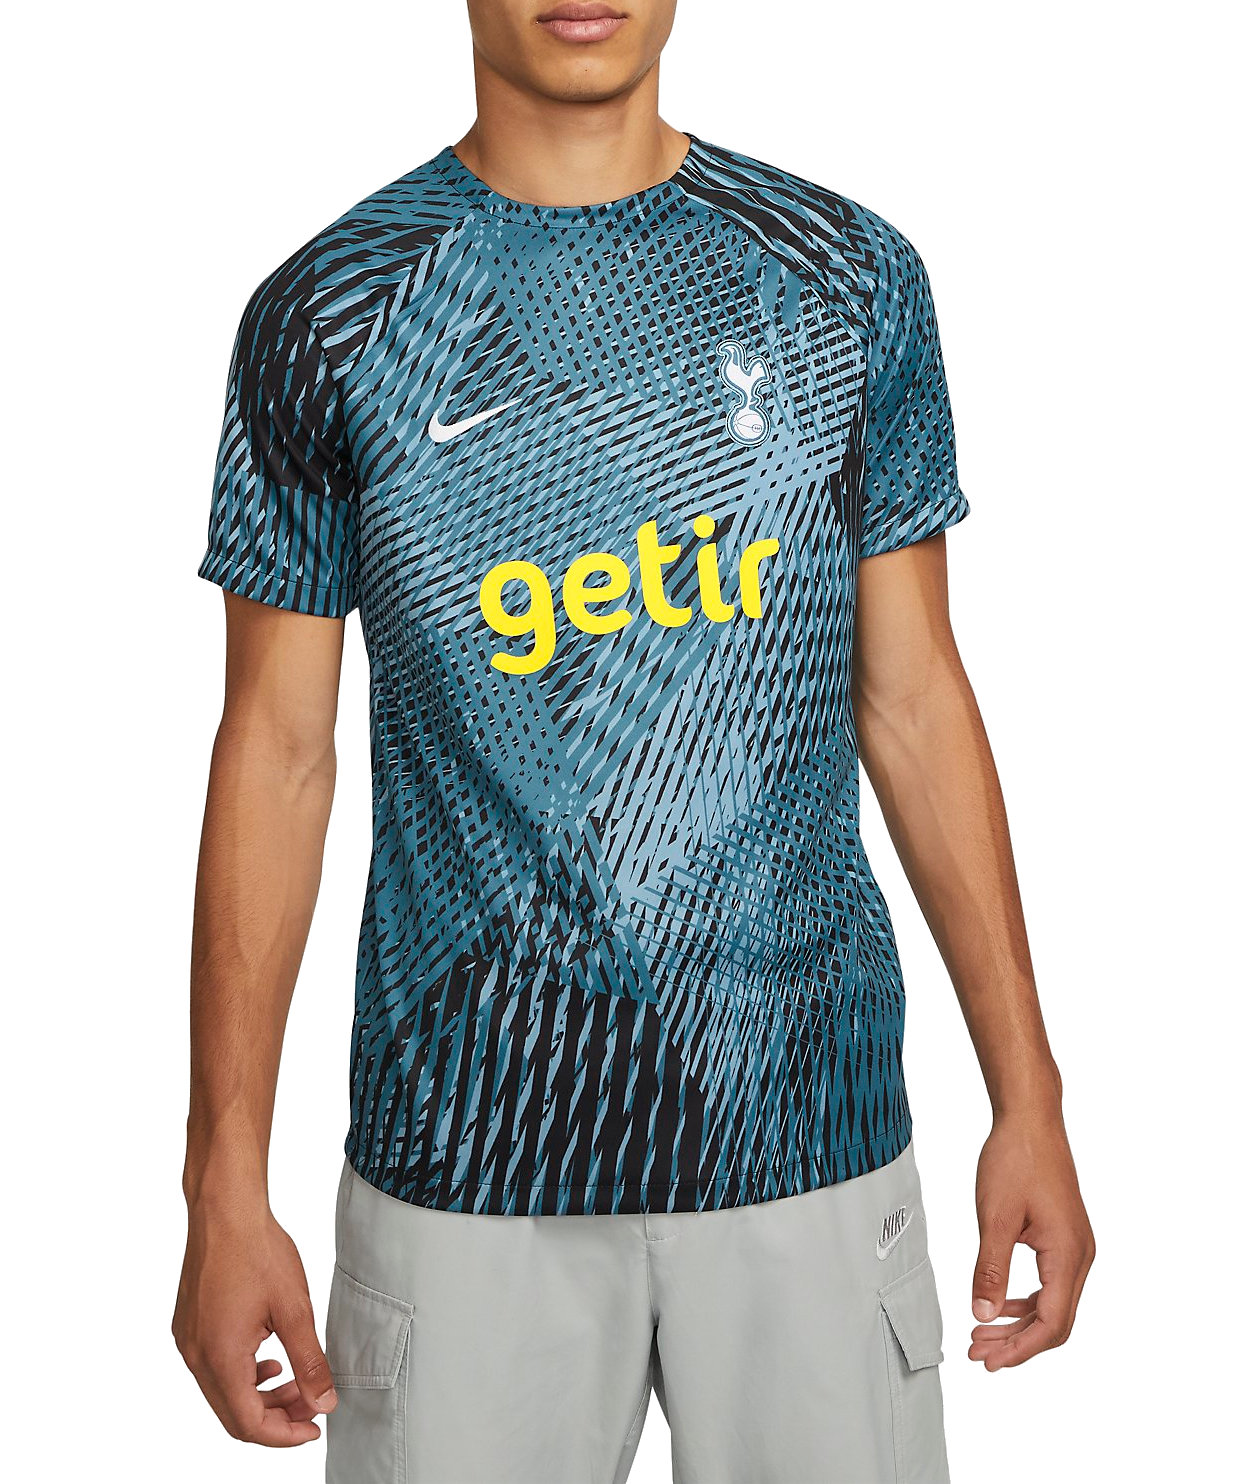 T-shirt Nike package THFC M NK DF TOP SS PM CL